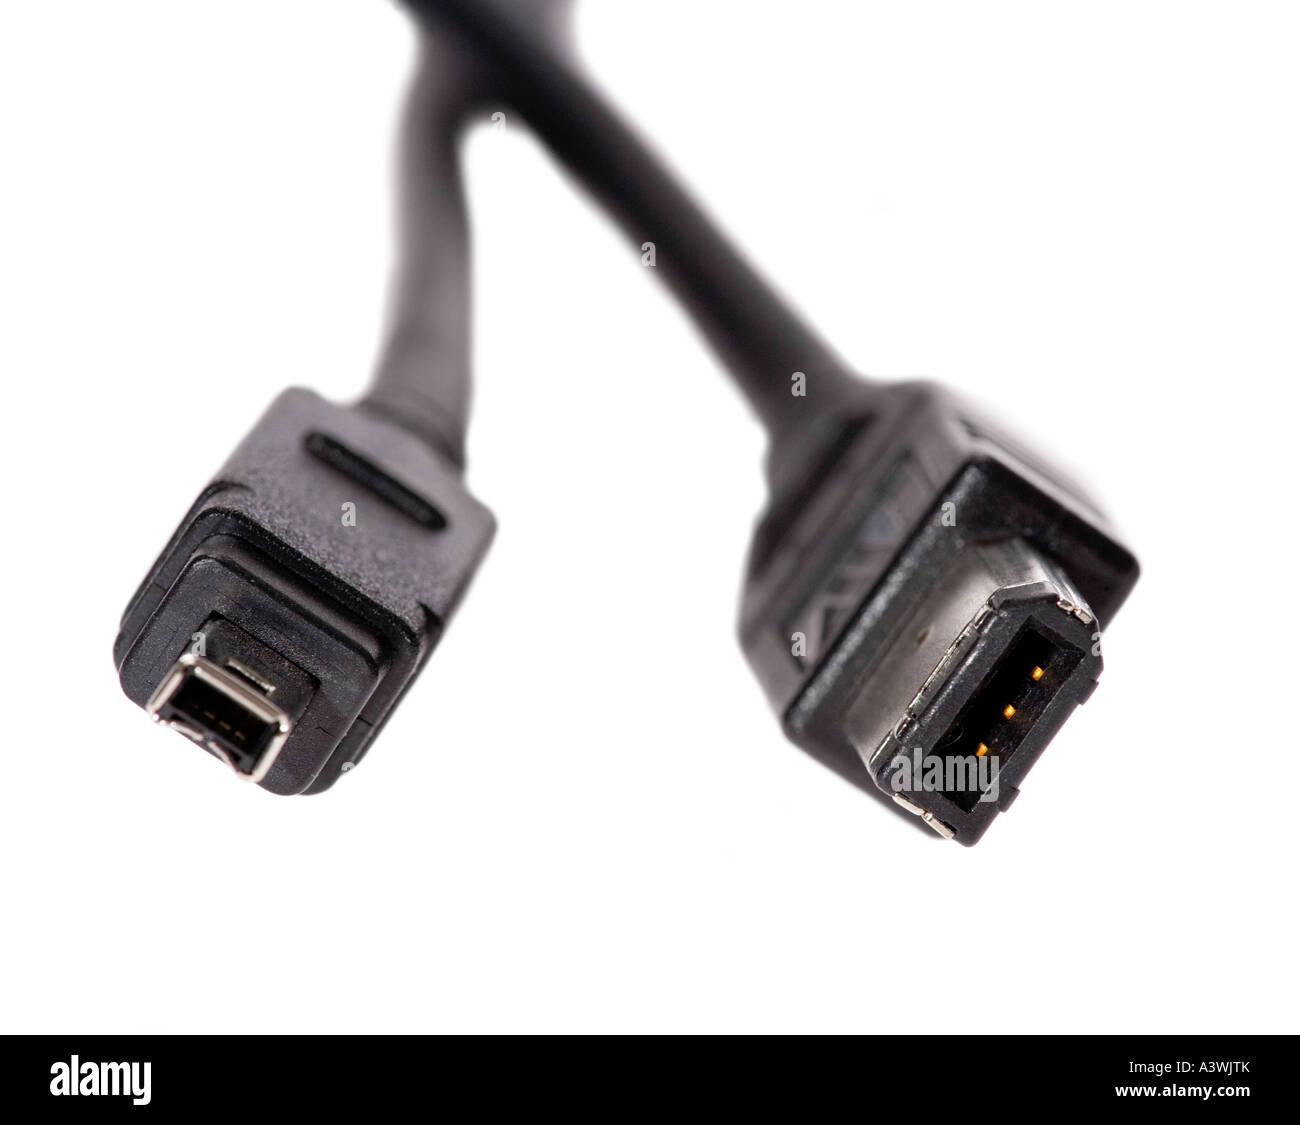 Firewire cable Stock Photo